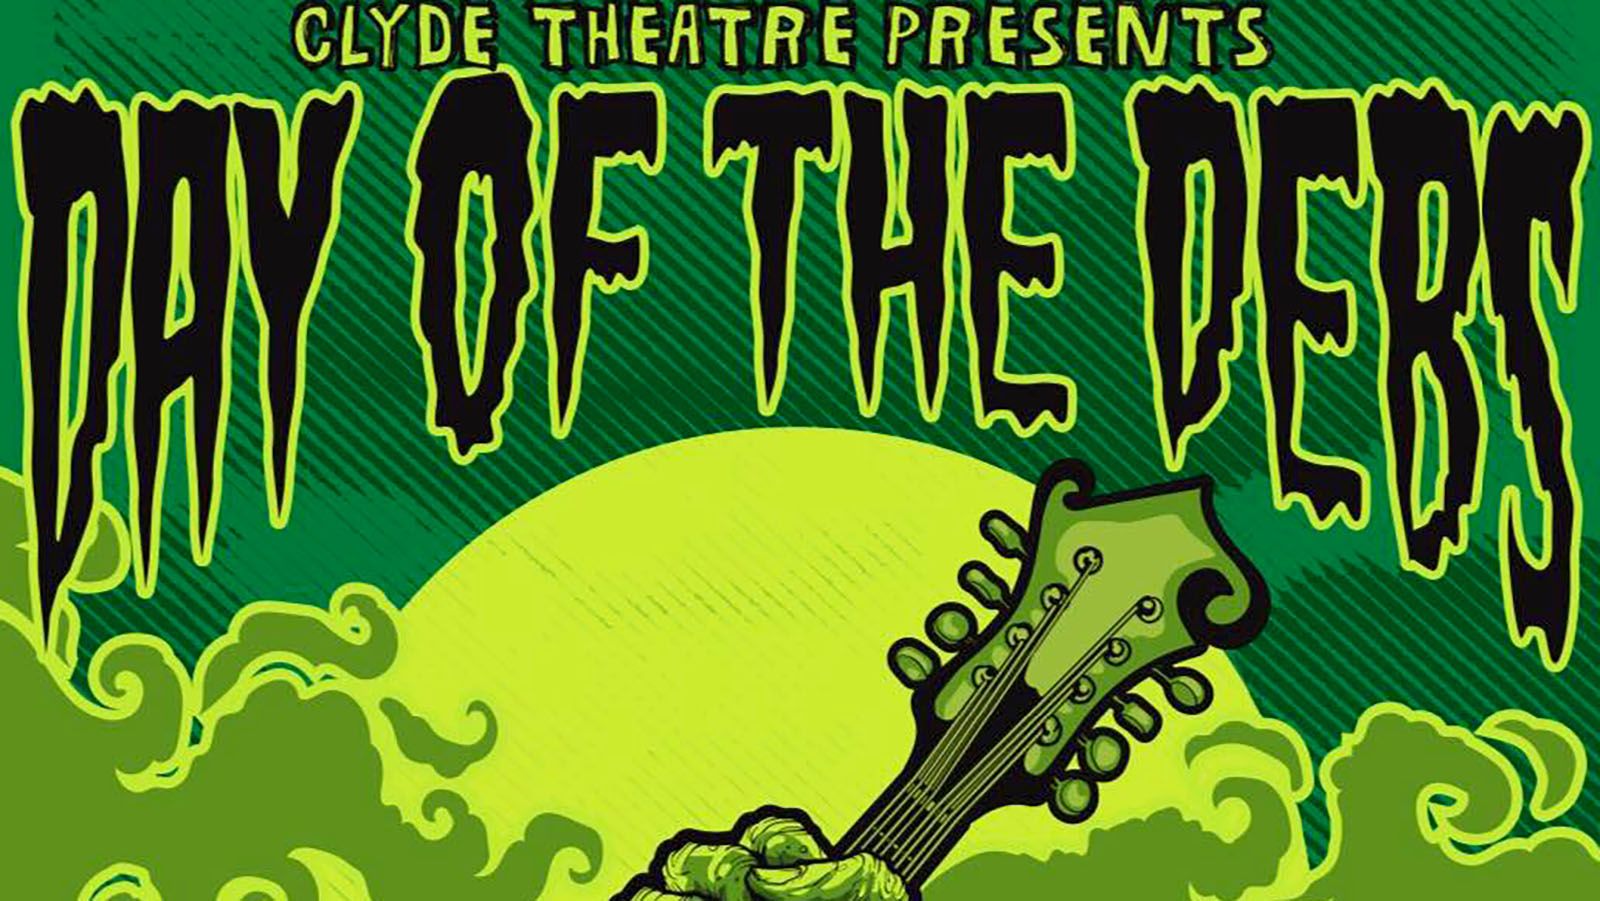 Local band Debutants will host a Halloween party Oct. 29 at The Clyde.